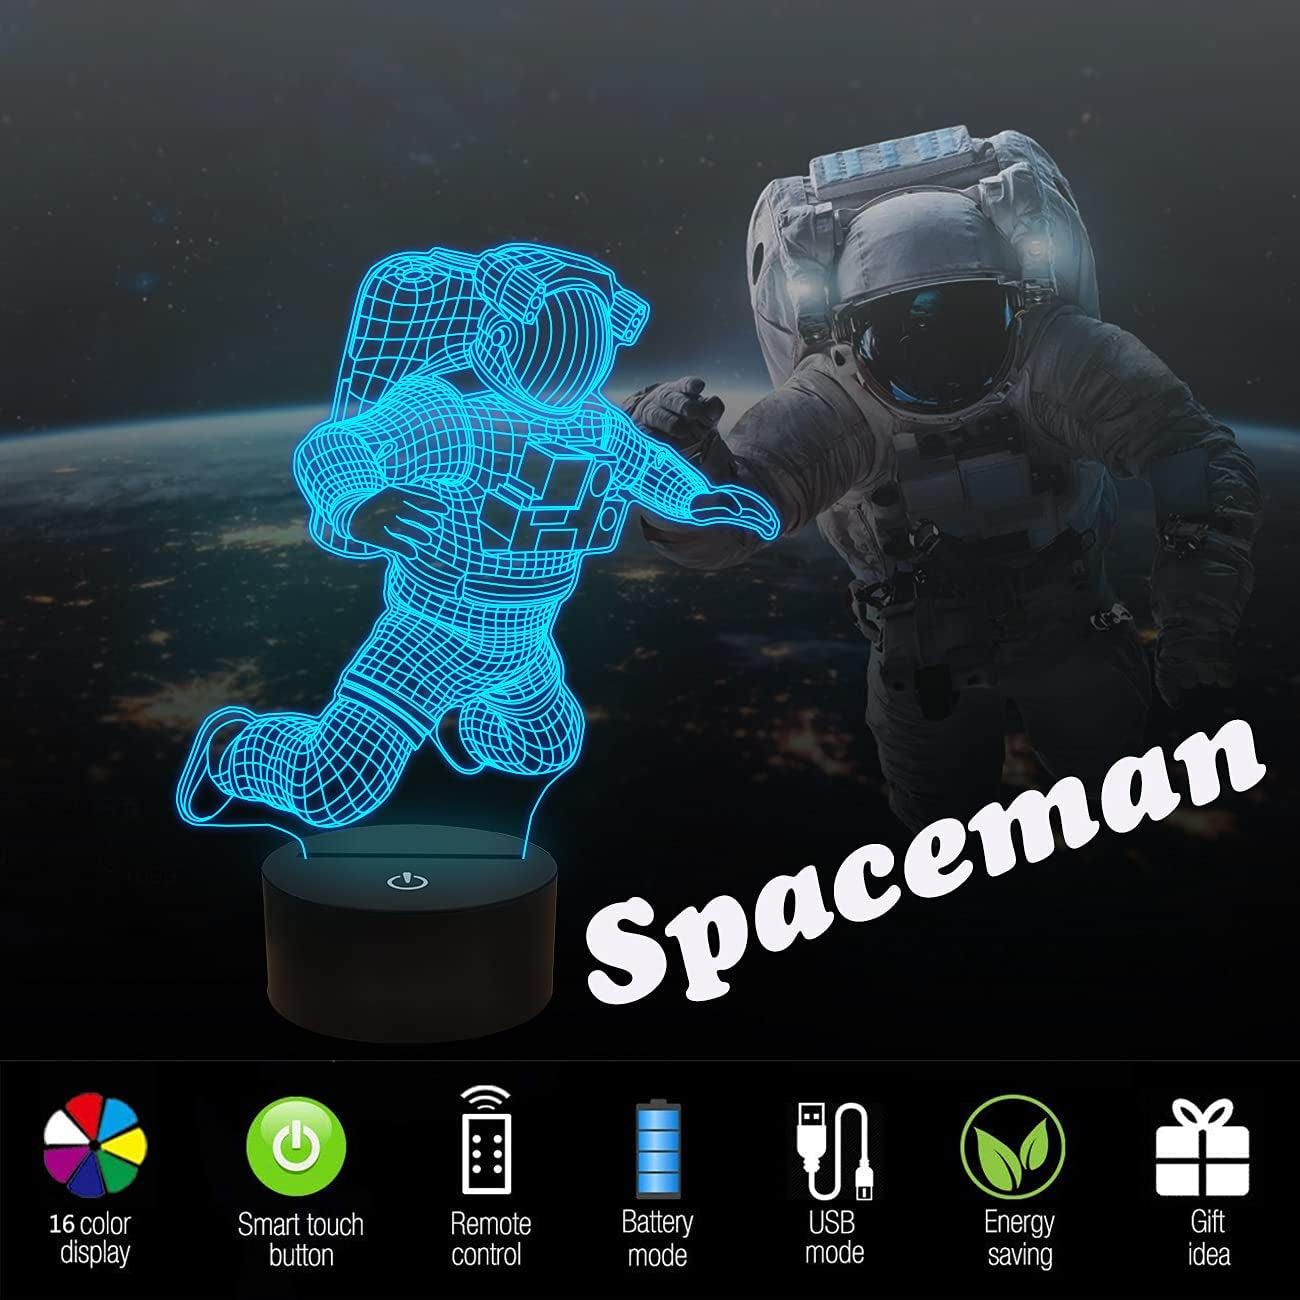 Spaceman 3D Night Light, Astronaut Rocket Optical Illusion Lamp Home Decor Bedroom Light with Remote Control 16 Colors Changing Marvel Xmas Birthday Gift for Outer Space Fan…